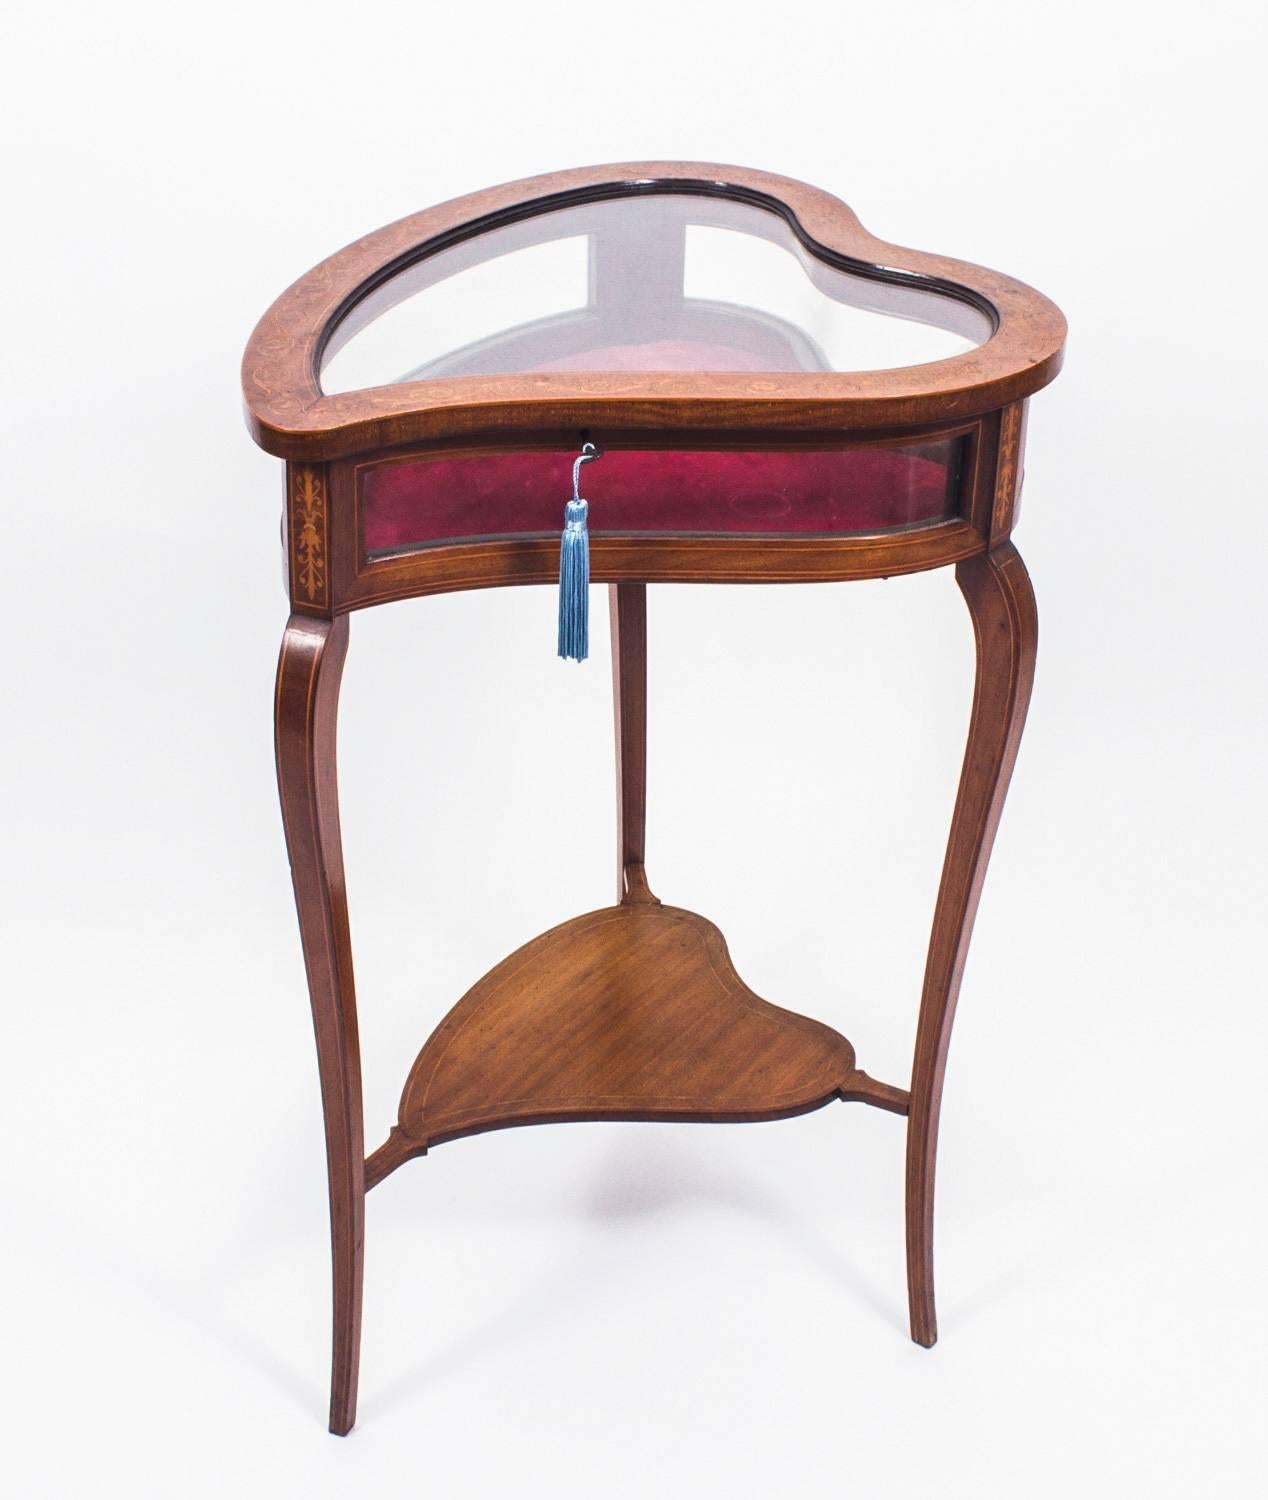 This is a beautiful antique Edwardian inlaid mahogany and heart shaped display table in the Louis XV style, circa 1890 in date.

It has a glazed lift top with glazed sides and it's original burgundy velvet lining. The glass top is framed with